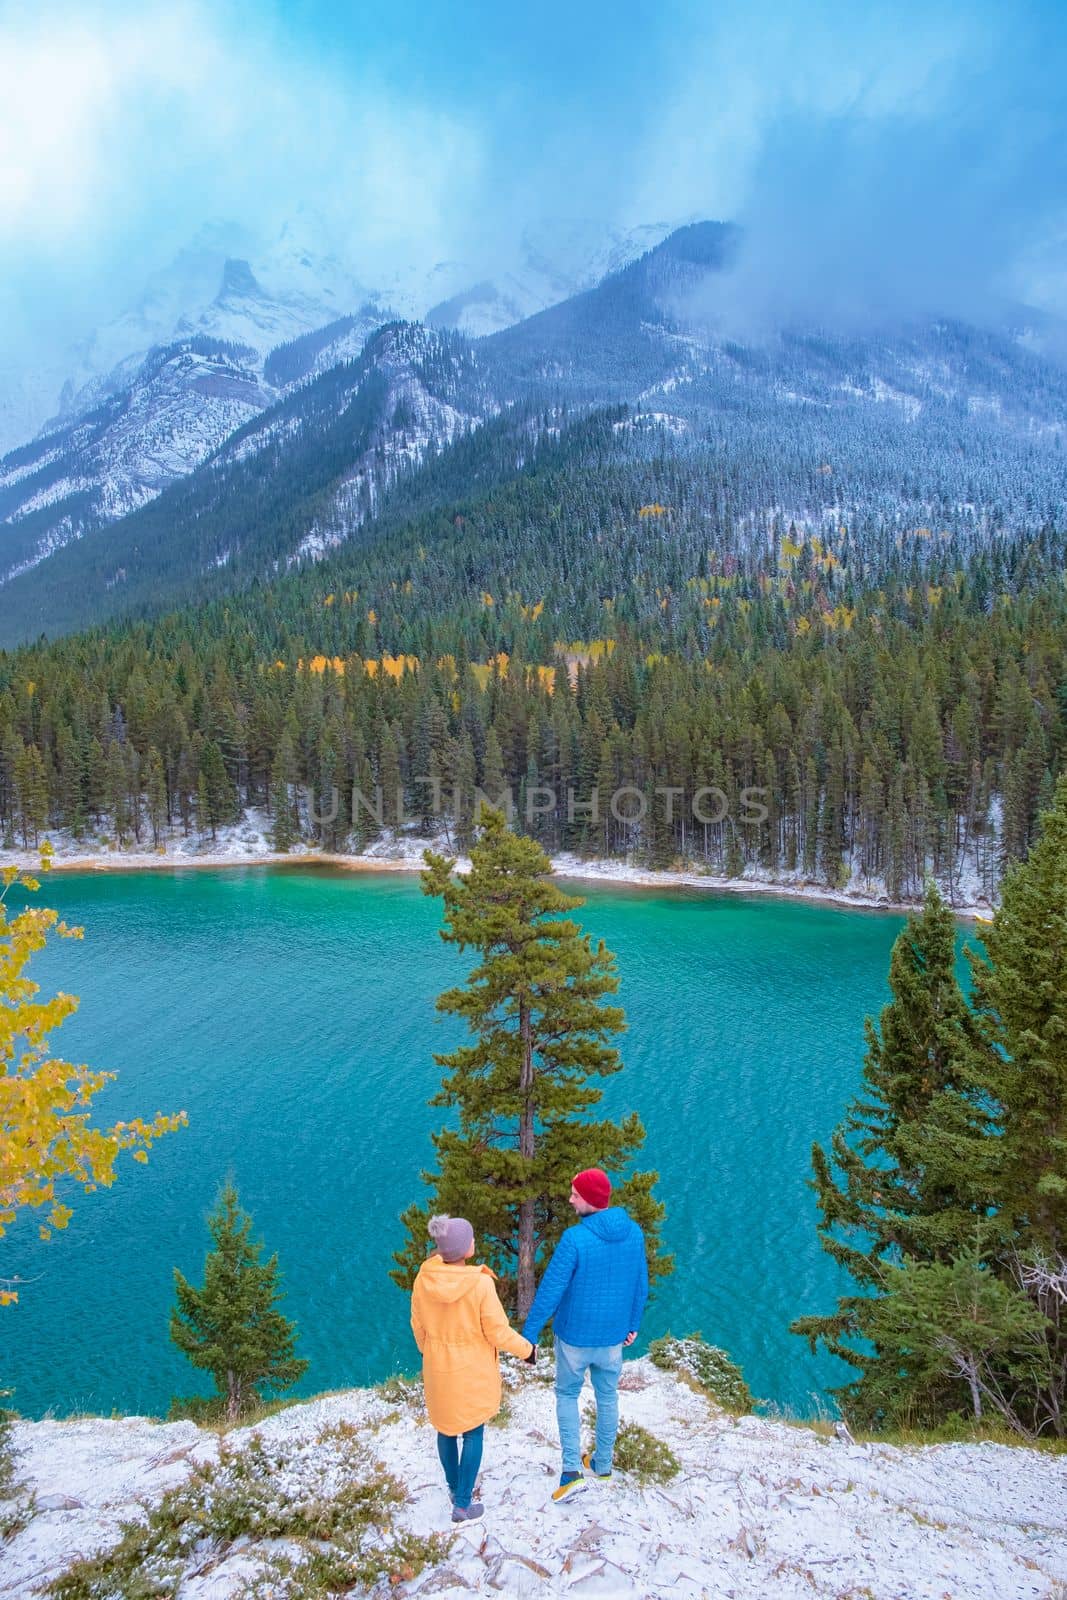 Minnewanka lake Banff Alberta Canada with turquoise water Lake Two Jack in the Rocky Mountains of Canada. by fokkebok